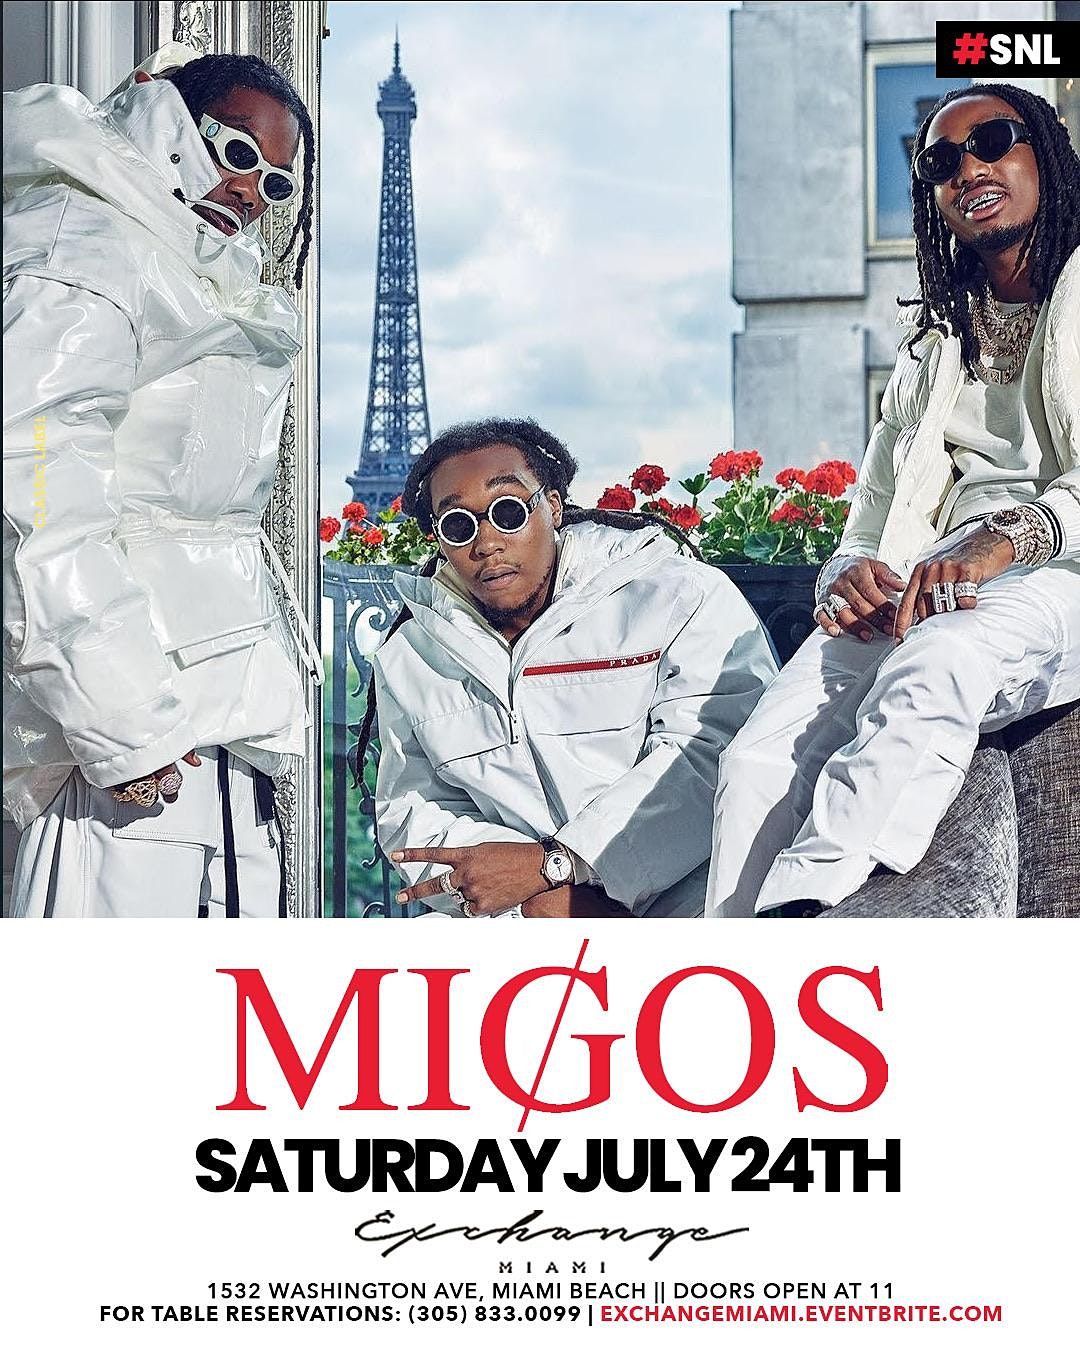 MIGOS ROLLING LOUD CONCERT AFTER PARTY